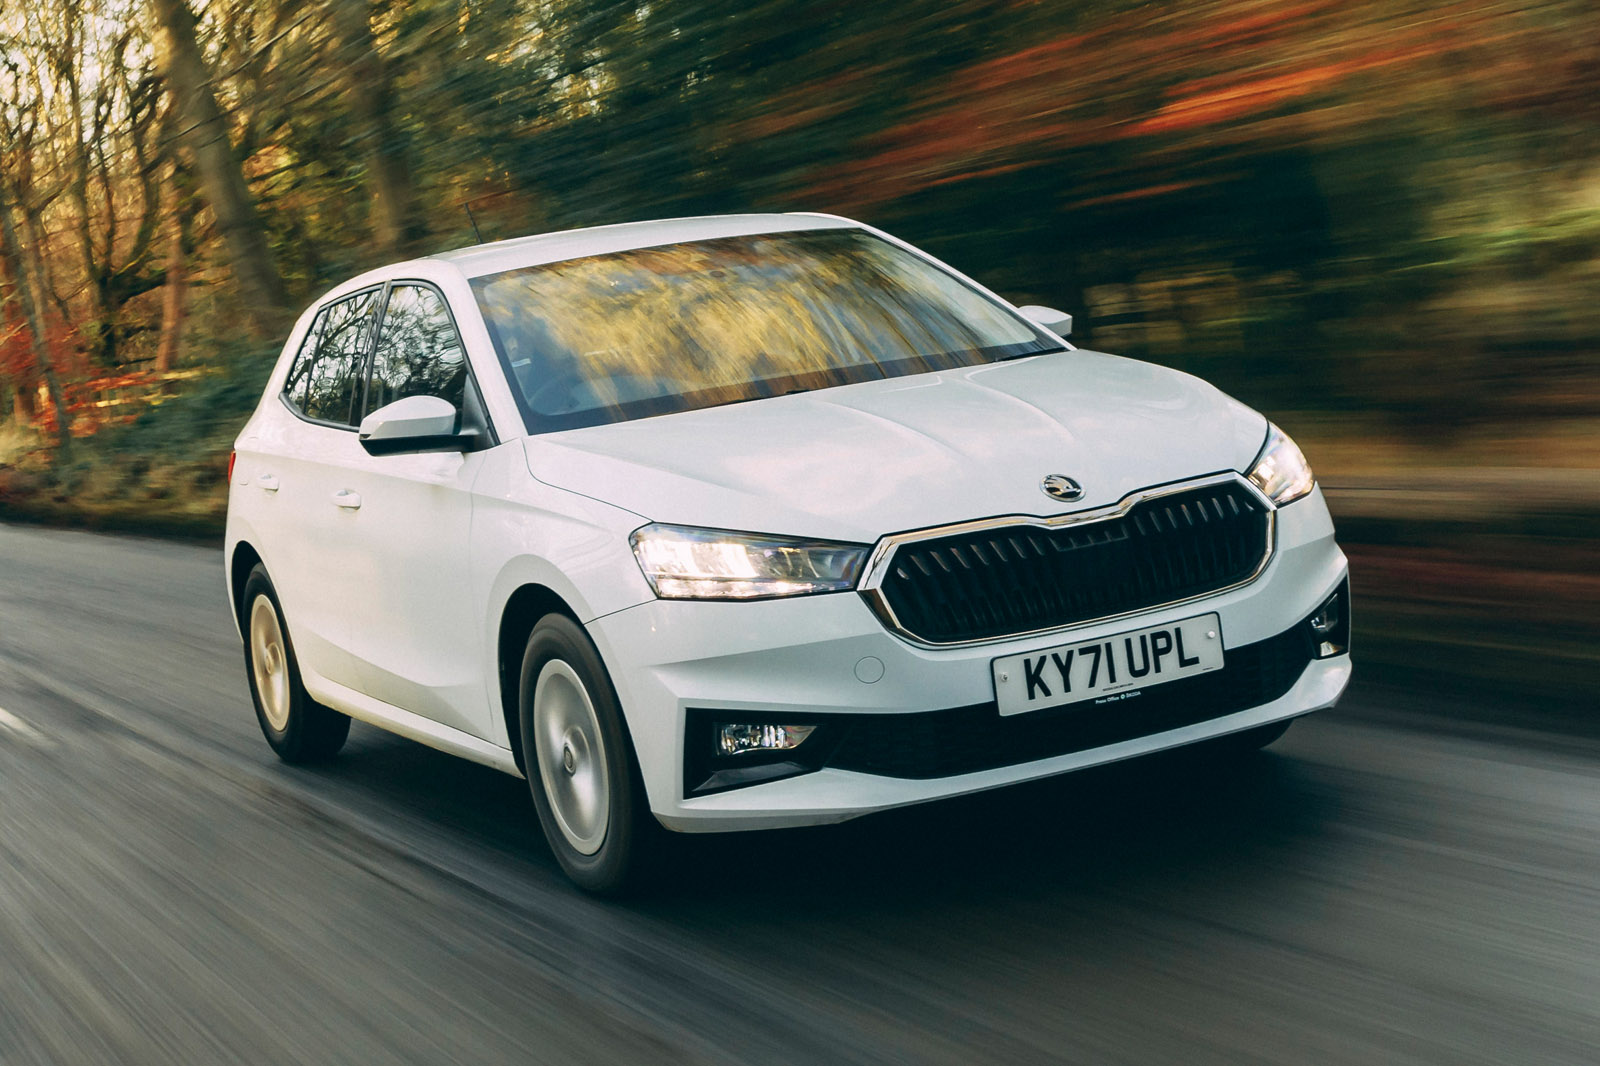 https://www.autocar.co.uk/sites/autocar.co.uk/files/1-skoda-fabia-2022-road-test-review-tracking-front.jpg